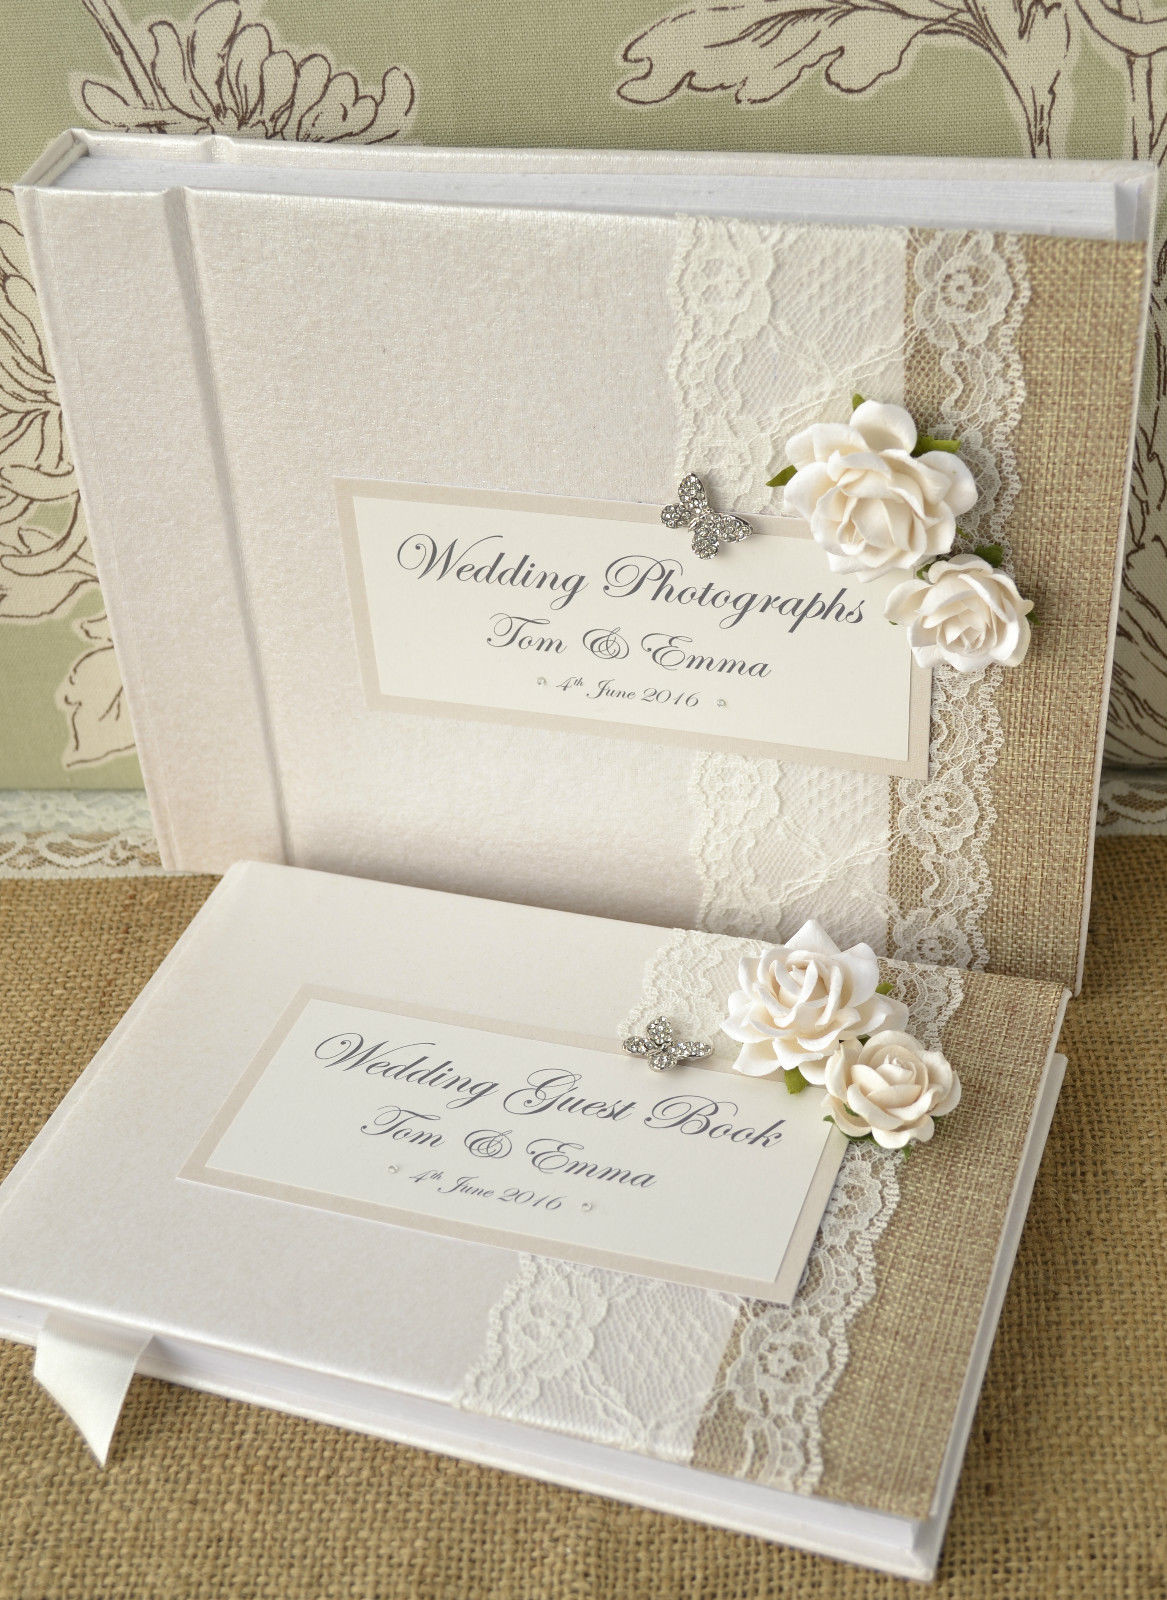 Guest Book Wedding Uk
 Luxury Personalised Wedding Guest Book & Album Set Lace